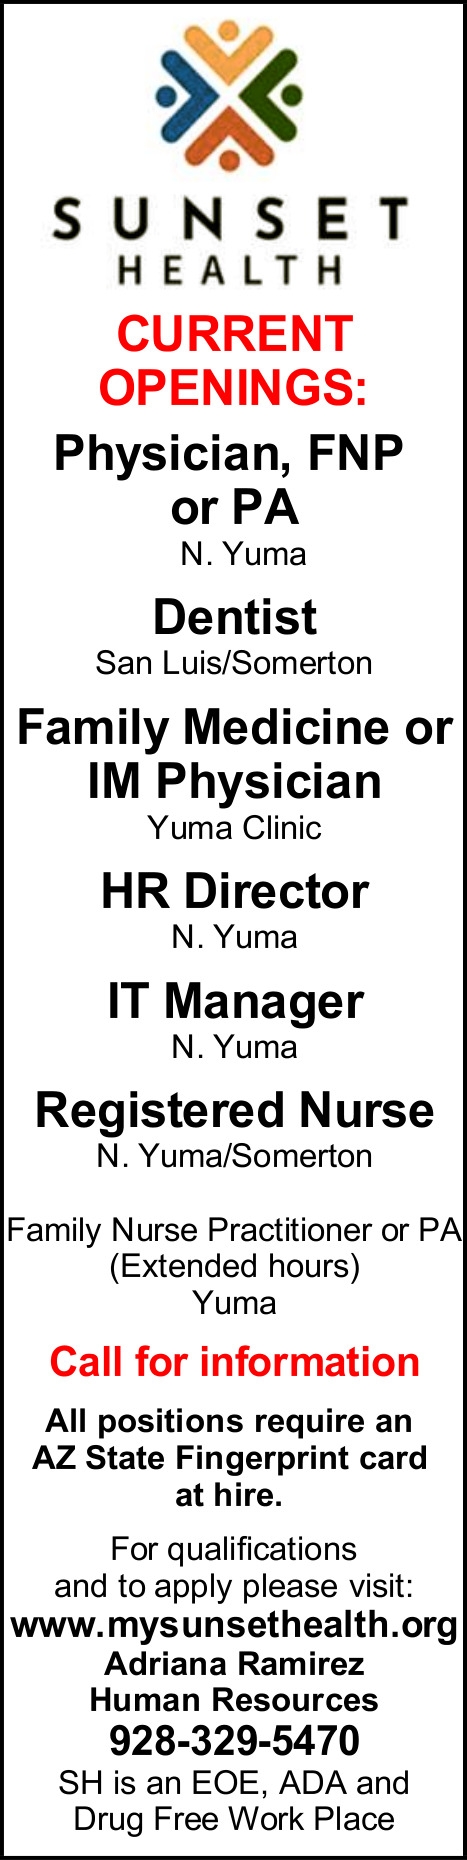 Physician, FNP or PA